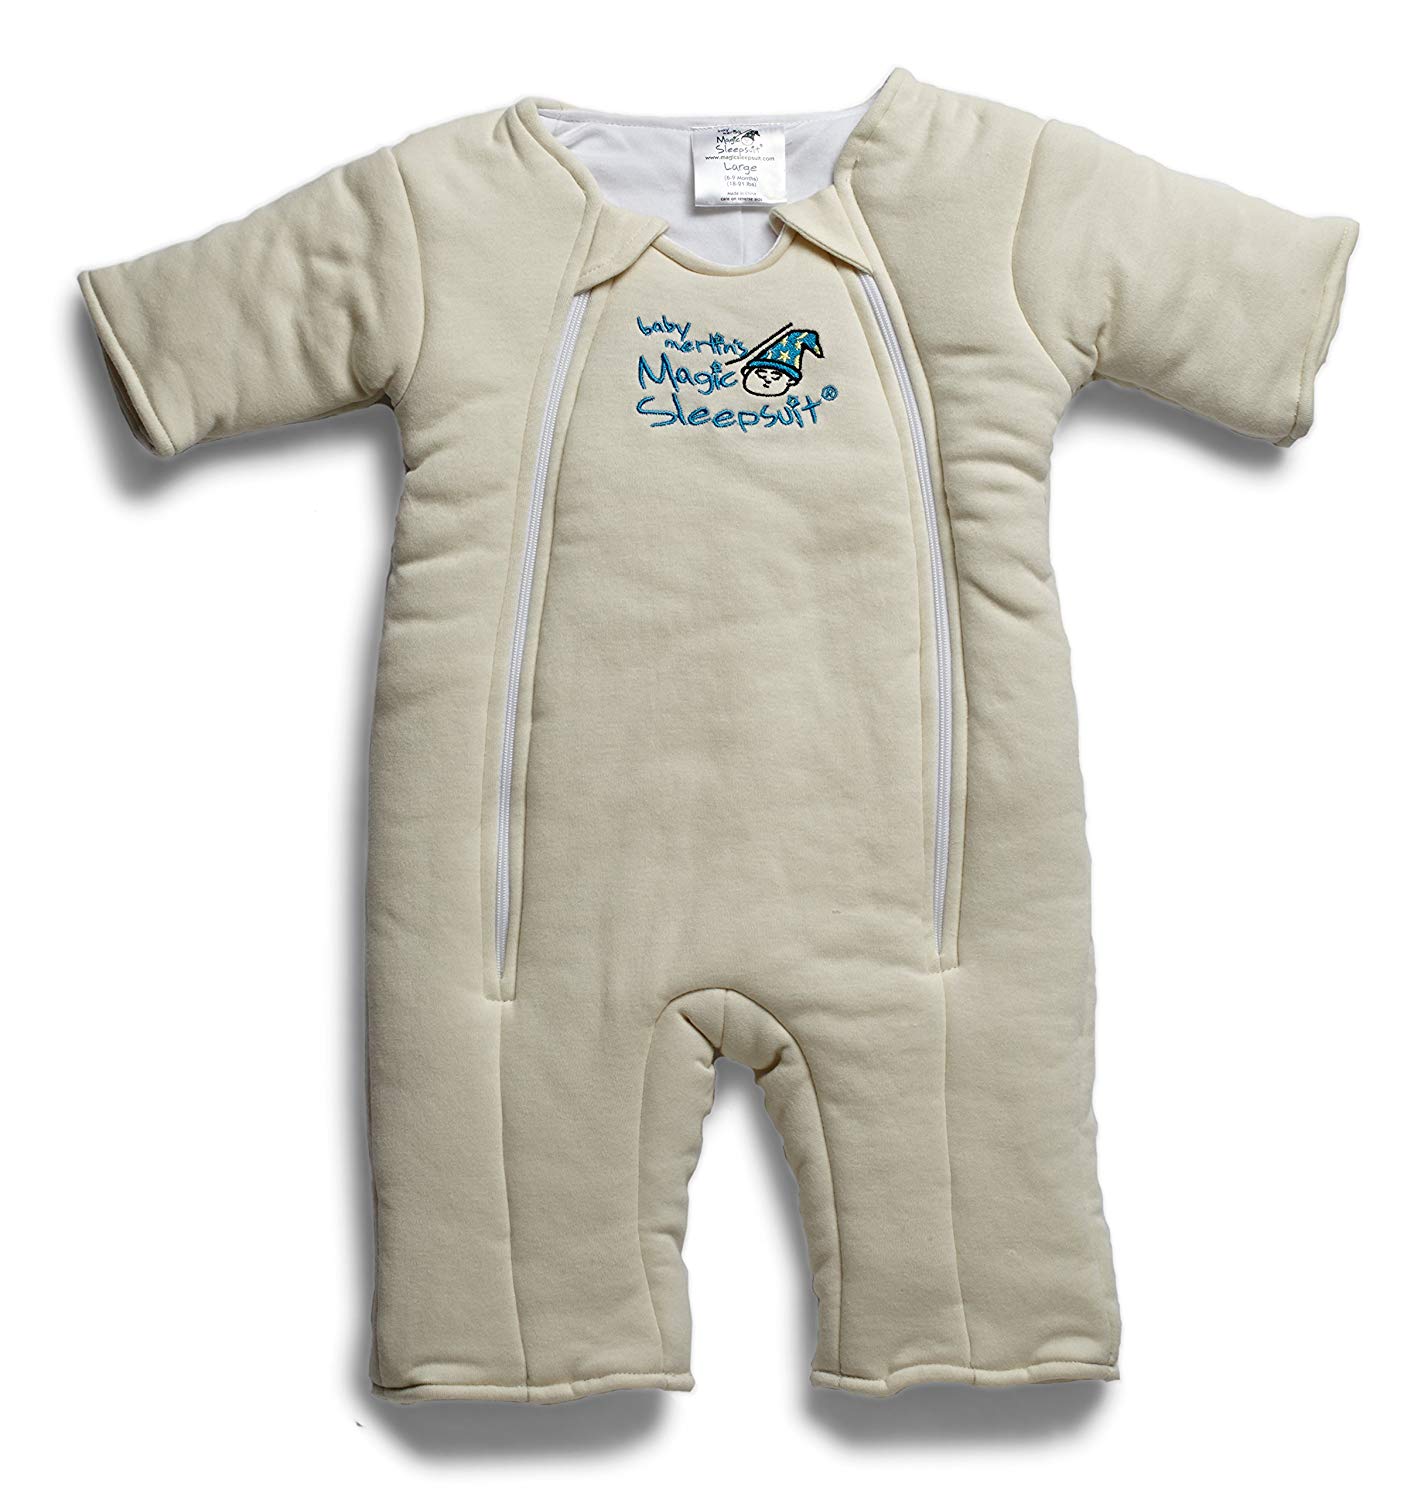 Baby Merlin's Magic Sleepsuit - Swaddle Transition Product For $30.36 w ...